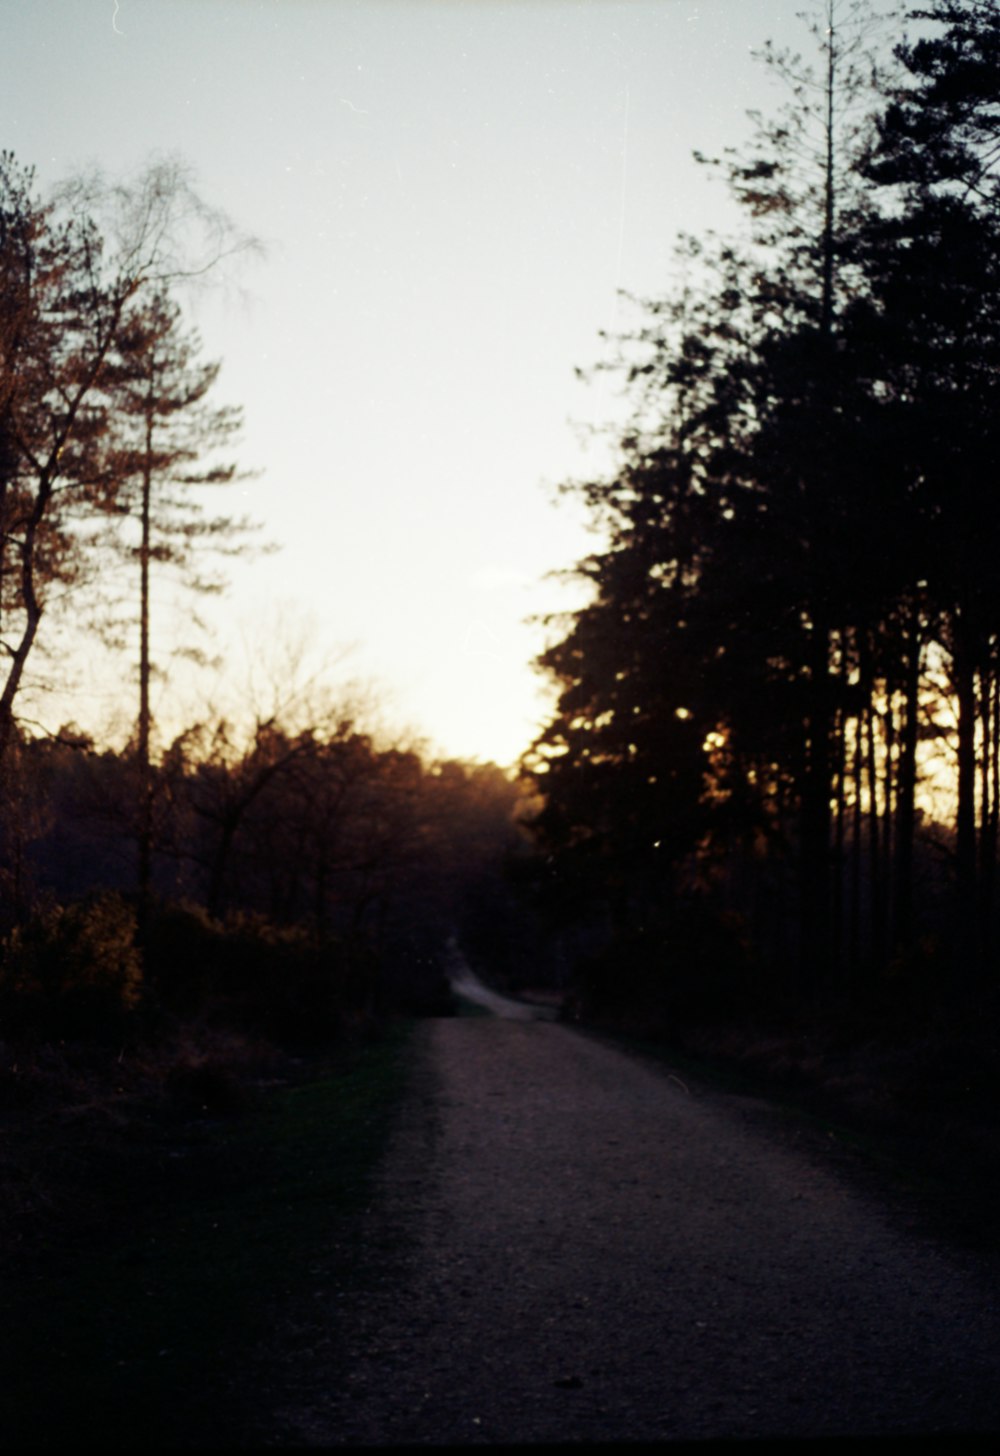 the sun is setting over a road in the woods